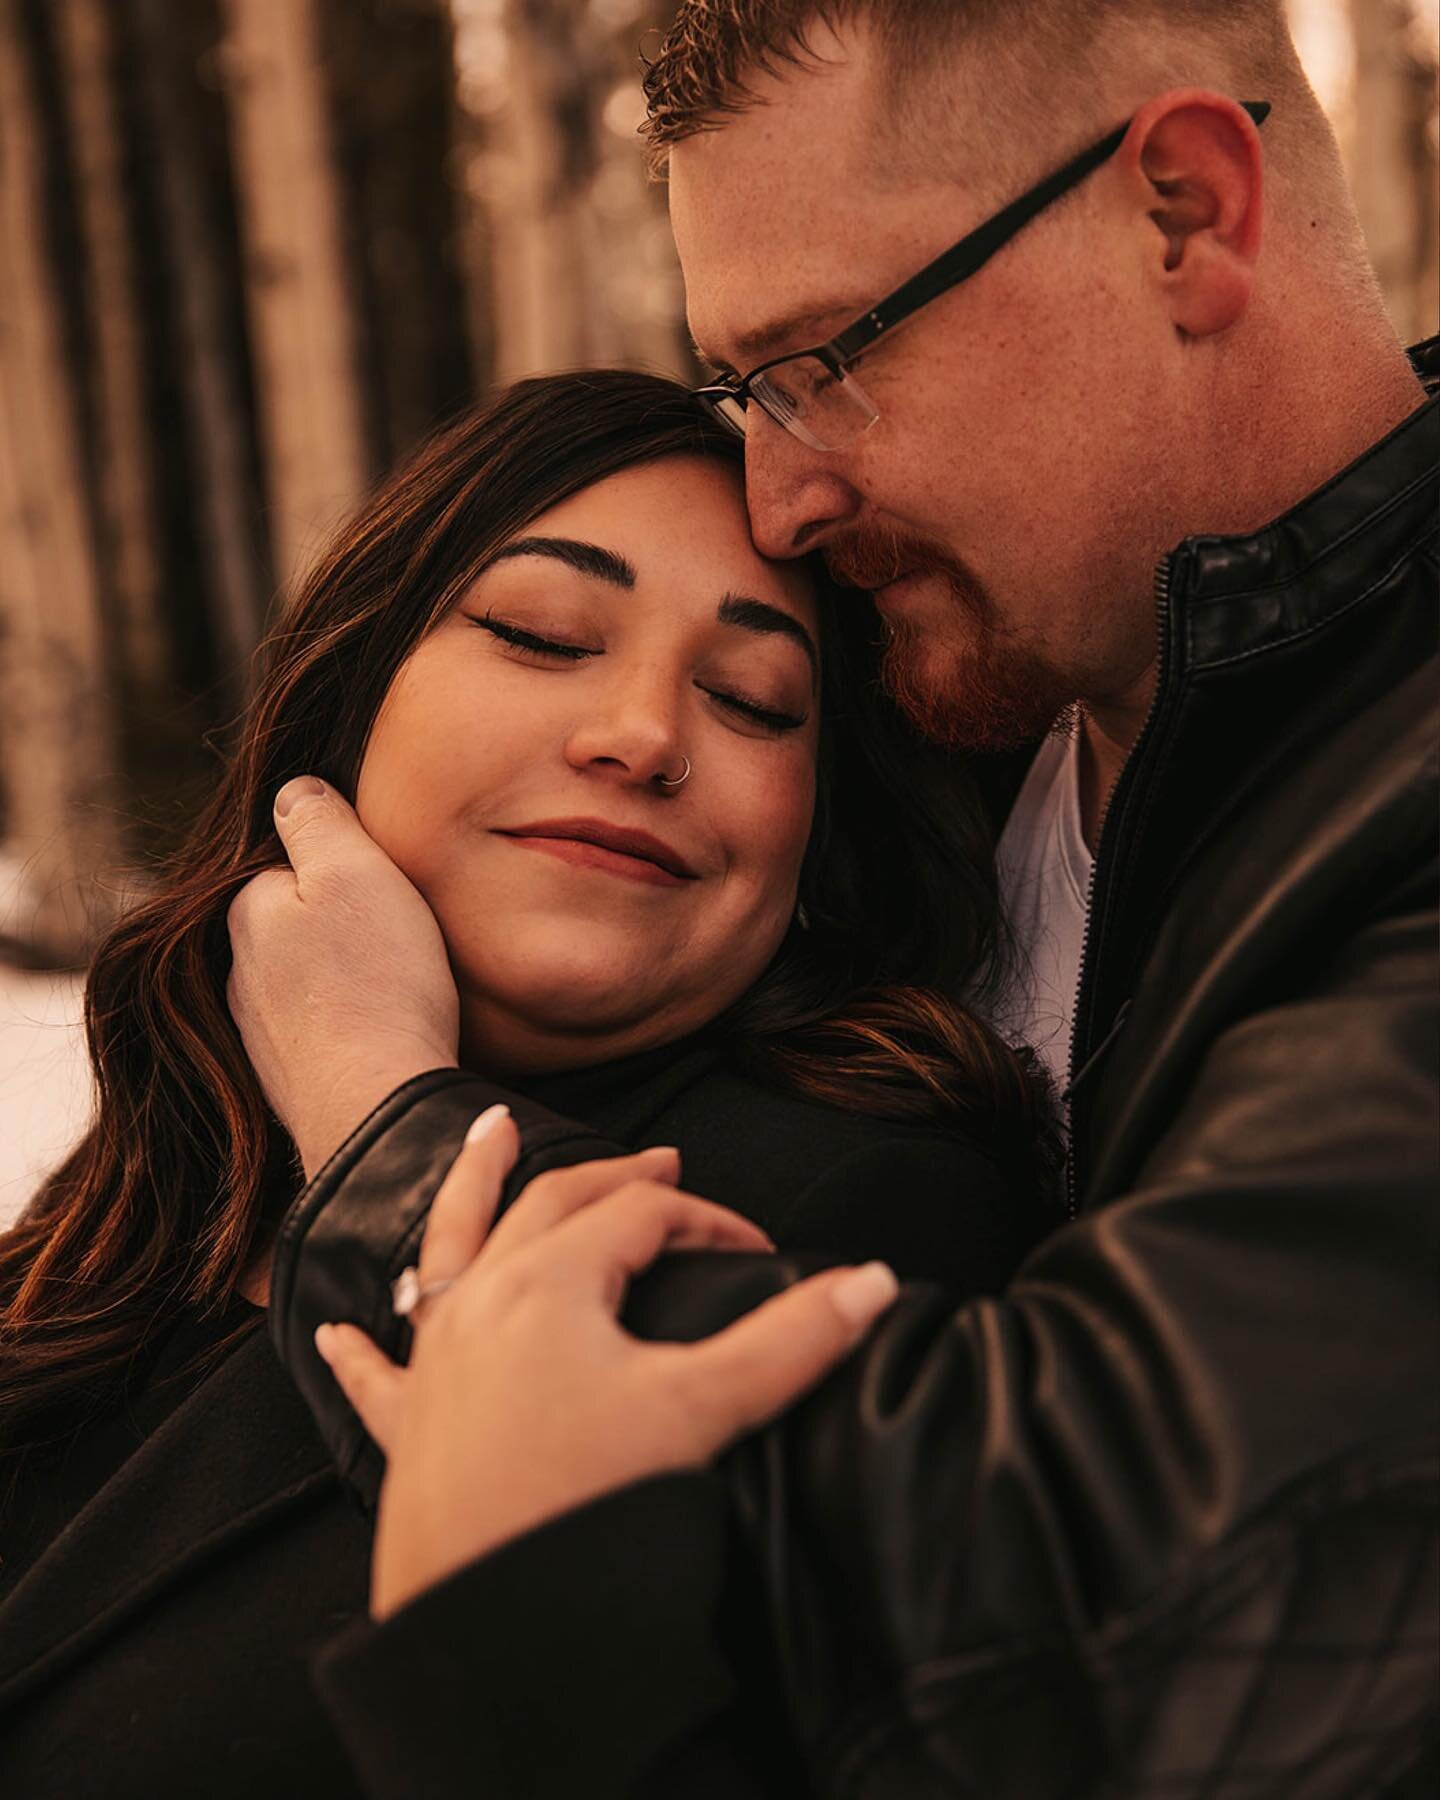 Cold winter months but make it moody 
&bull;
&bull;
&bull;
#coloradoengagementphotographer #coloradoengagement #coloradoengaged #coloradoengagementphotos #alpinelake #alpinelakeengagement #engagementphotos #engaged #engagementphotos #aspengrove #wint